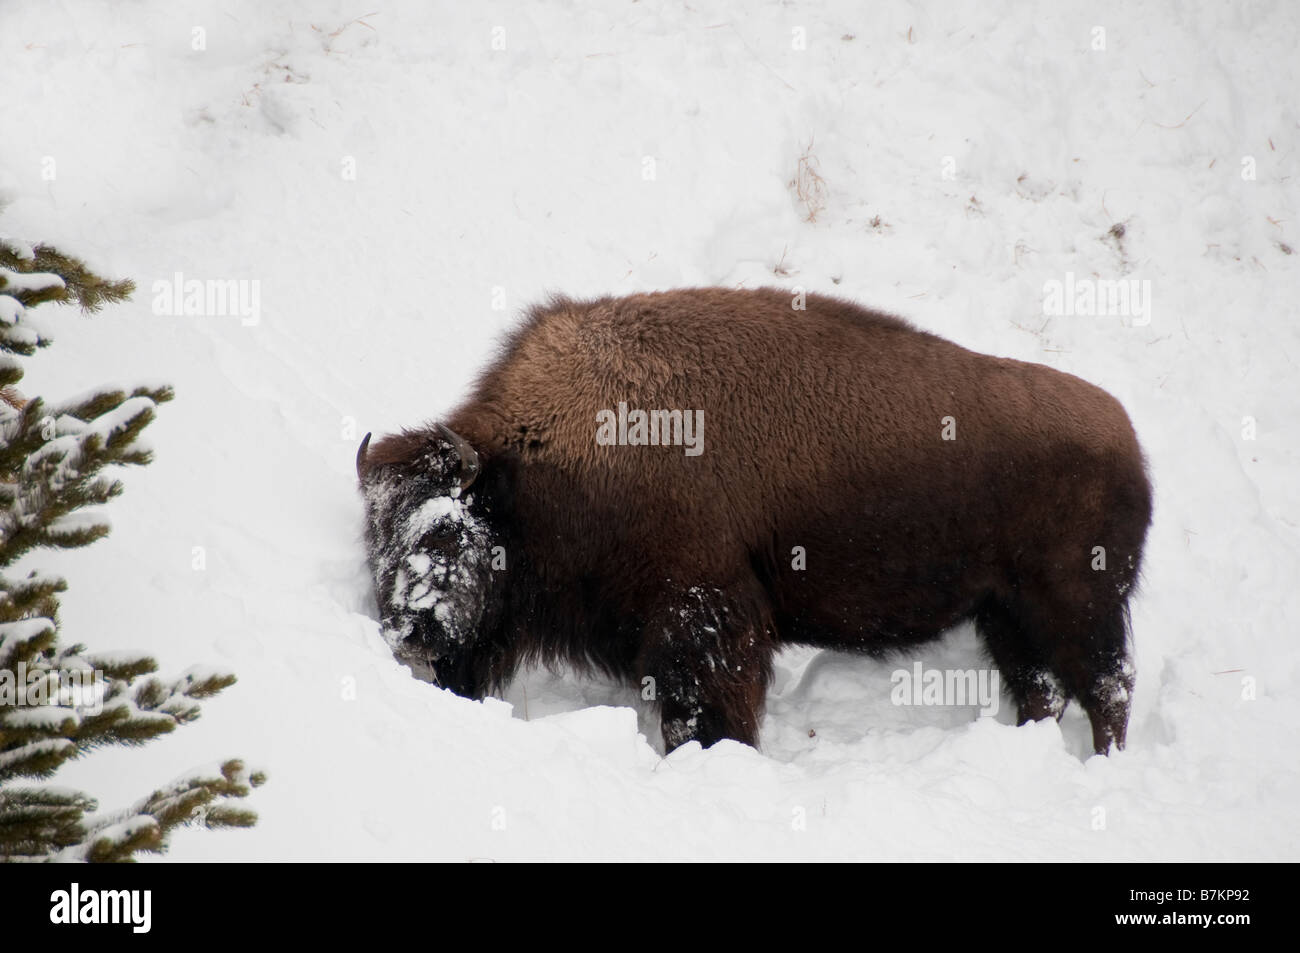 American bison [Bison bison] besid the road near Canyon Village, winter, Yellowstone National Park, Wyoming. Stock Photo